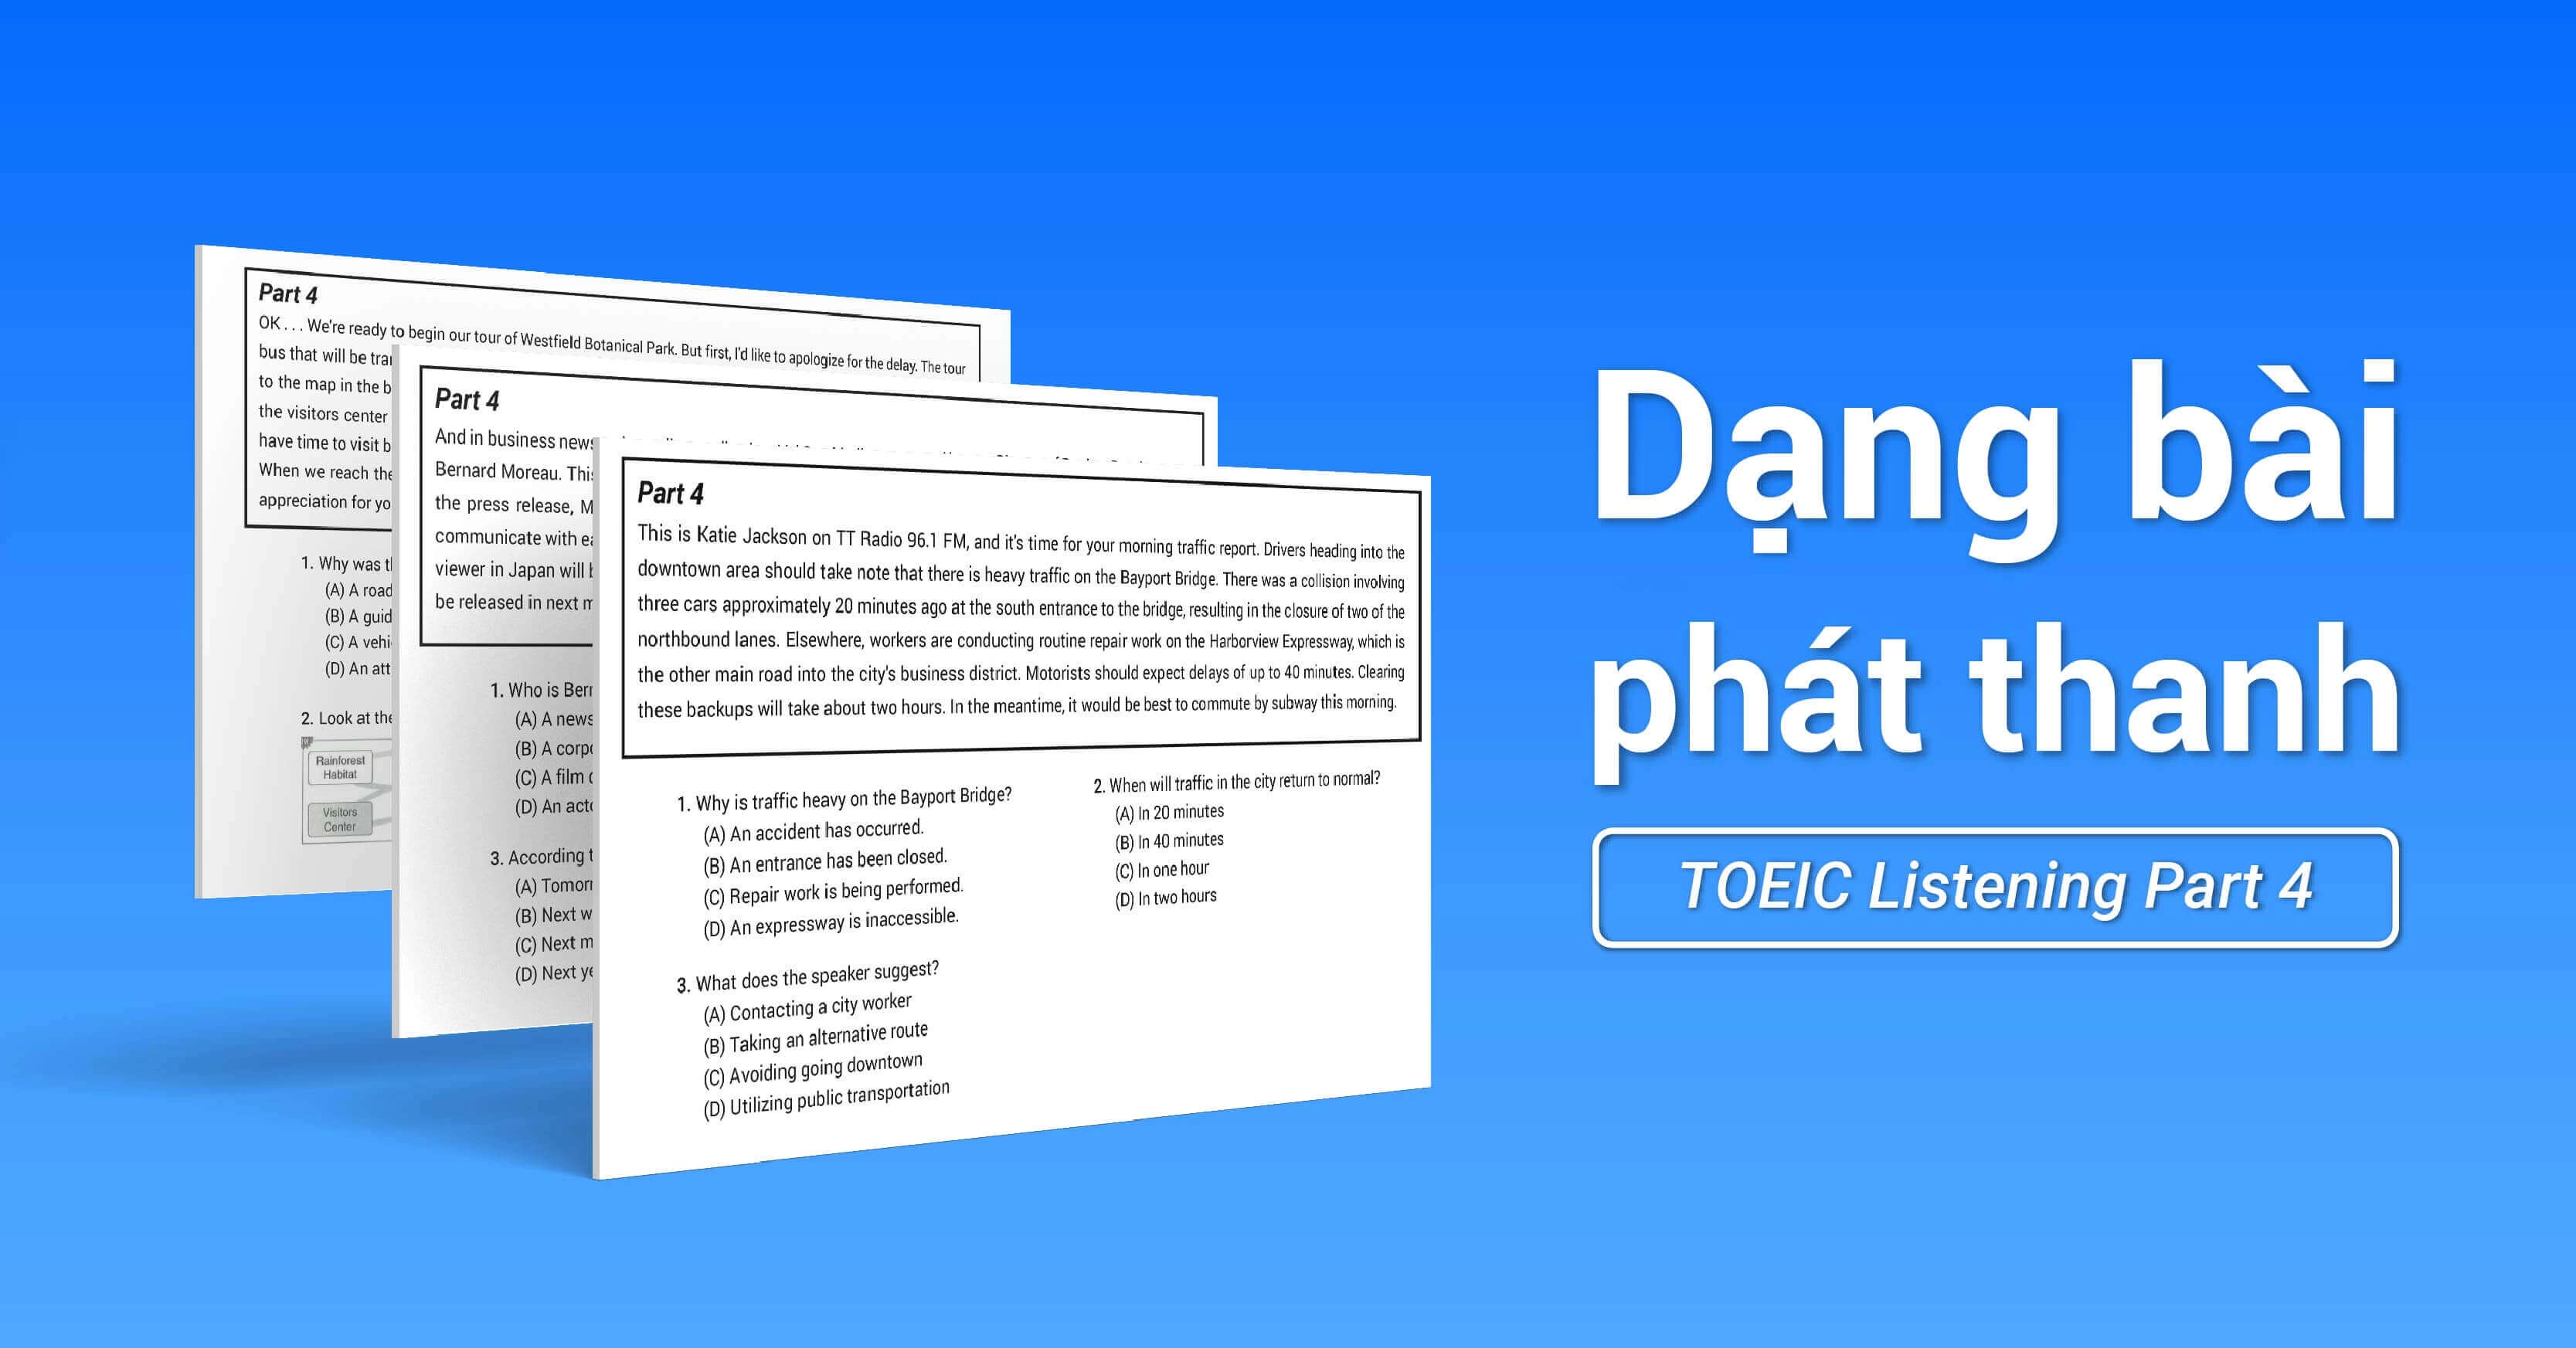 cach lam dang bai phat thanh broadcasts trong toeic listening part 4 